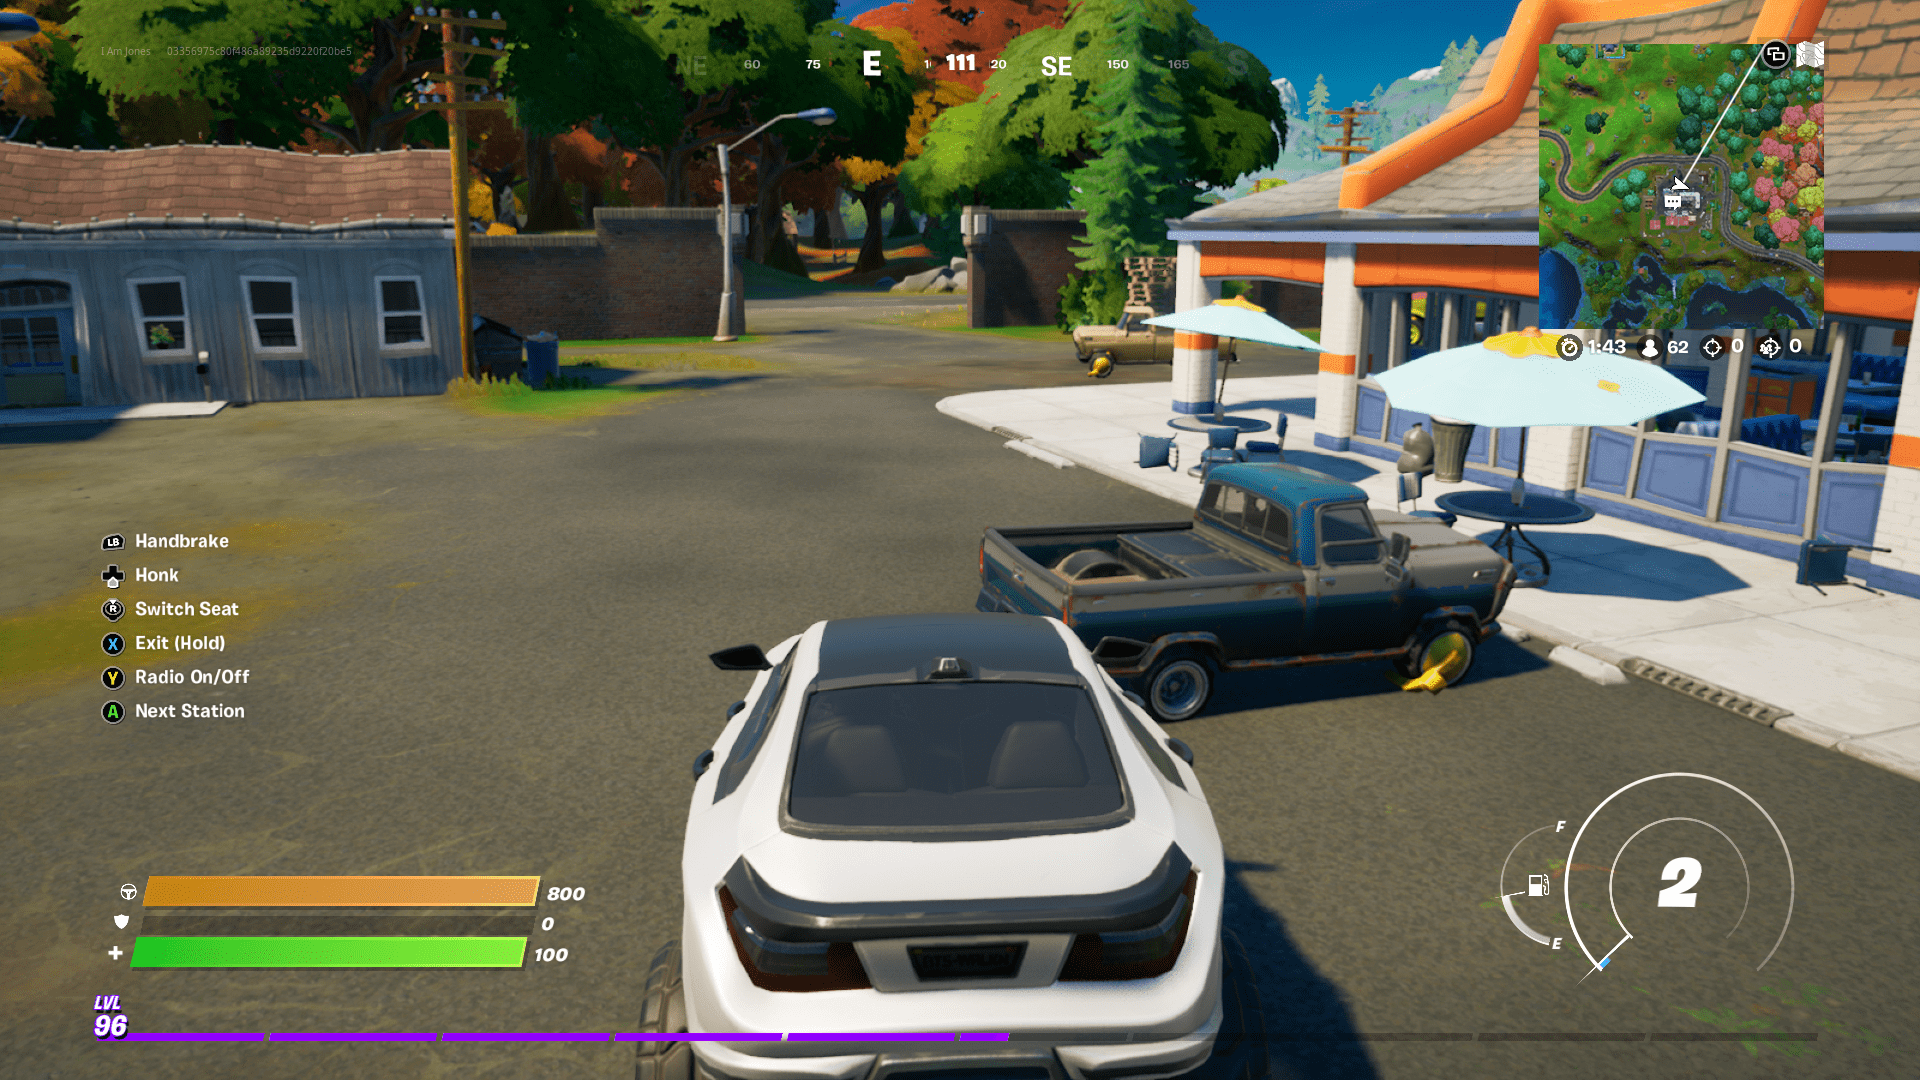 Fortnite Quests Drive From Durrr Burger To Pizza Pit Without Exiting A Vehicle